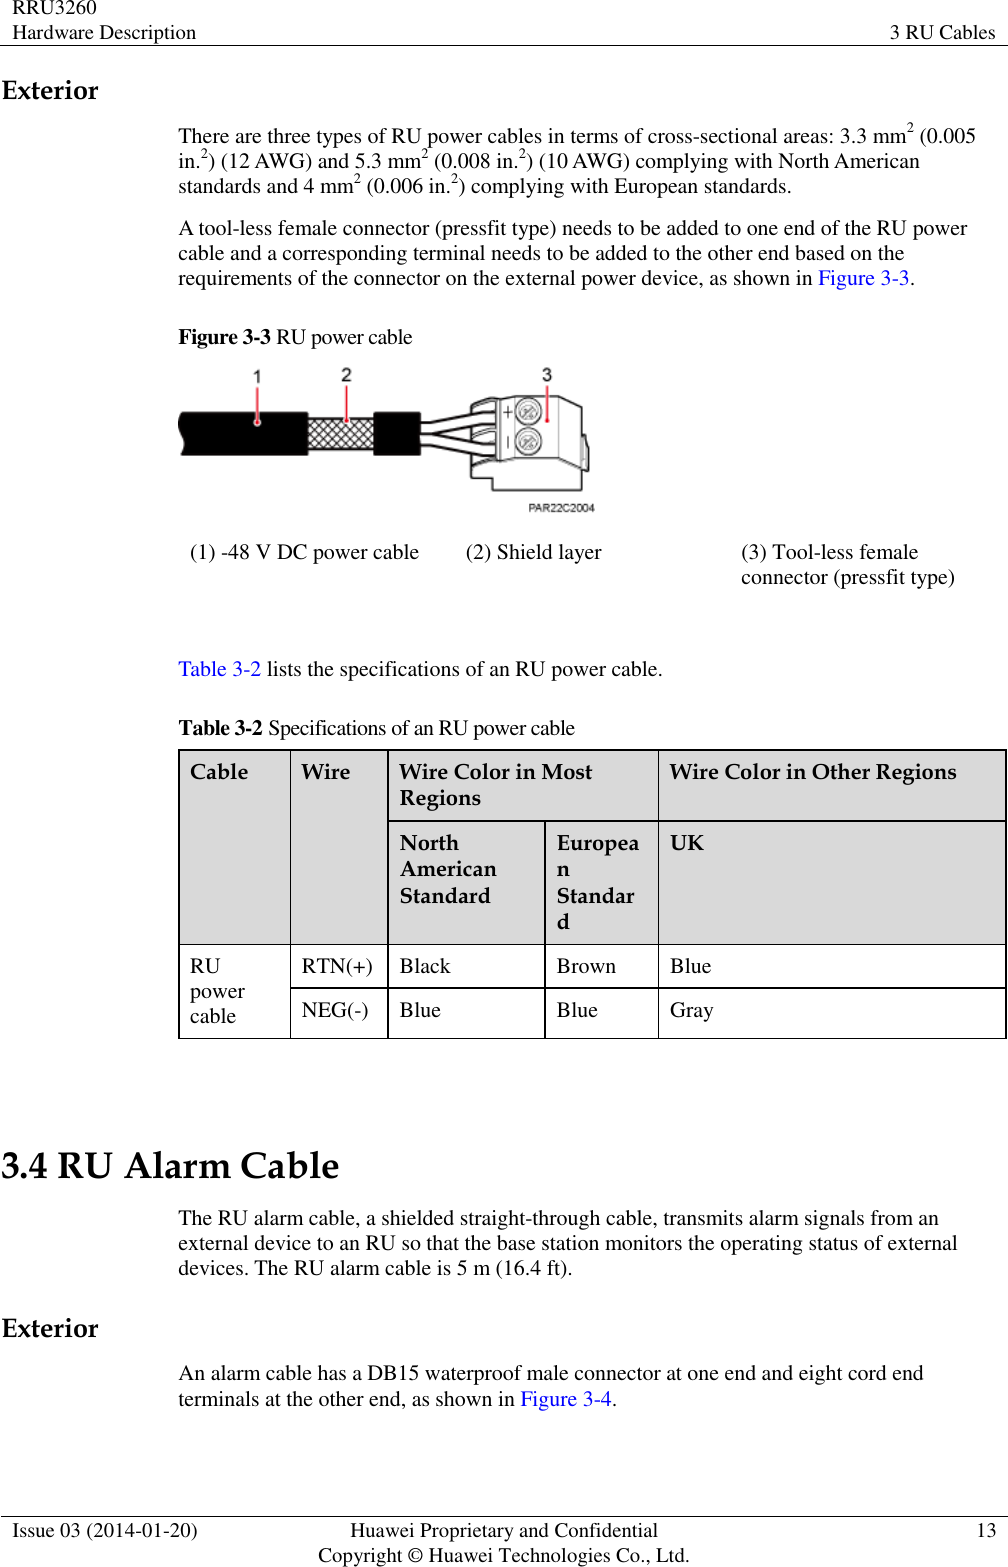 RRU3260 Hardware Description 3 RU Cables  Issue 03 (2014-01-20) Huawei Proprietary and Confidential                                     Copyright © Huawei Technologies Co., Ltd. 13  Exterior There are three types of RU power cables in terms of cross-sectional areas: 3.3 mm2 (0.005 in.2) (12 AWG) and 5.3 mm2 (0.008 in.2) (10 AWG) complying with North American standards and 4 mm2 (0.006 in.2) complying with European standards. A tool-less female connector (pressfit type) needs to be added to one end of the RU power cable and a corresponding terminal needs to be added to the other end based on the requirements of the connector on the external power device, as shown in Figure 3-3. Figure 3-3 RU power cable  (1) -48 V DC power cable (2) Shield layer (3) Tool-less female connector (pressfit type)  Table 3-2 lists the specifications of an RU power cable. Table 3-2 Specifications of an RU power cable Cable Wire Wire Color in Most Regions Wire Color in Other Regions North American Standard European Standard UK RU power cable RTN(+) Black Brown Blue NEG(-) Blue Blue Gray  3.4 RU Alarm Cable The RU alarm cable, a shielded straight-through cable, transmits alarm signals from an external device to an RU so that the base station monitors the operating status of external devices. The RU alarm cable is 5 m (16.4 ft). Exterior An alarm cable has a DB15 waterproof male connector at one end and eight cord end terminals at the other end, as shown in Figure 3-4. 